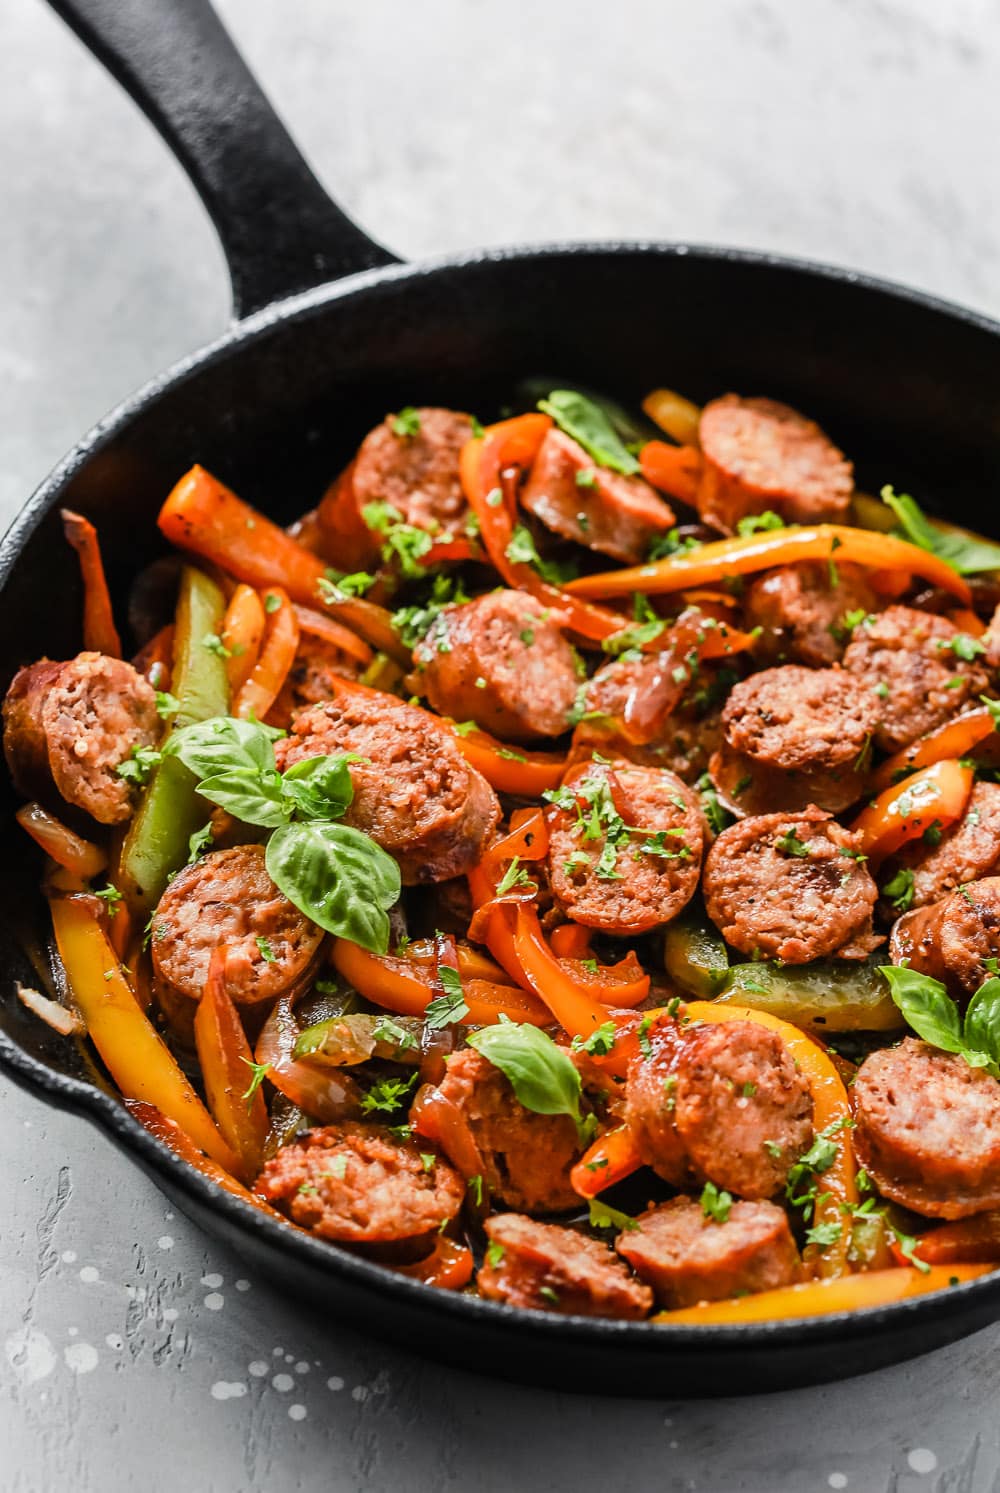 Italian Sausage, Onions and Peppers Skillet in a close-up shot